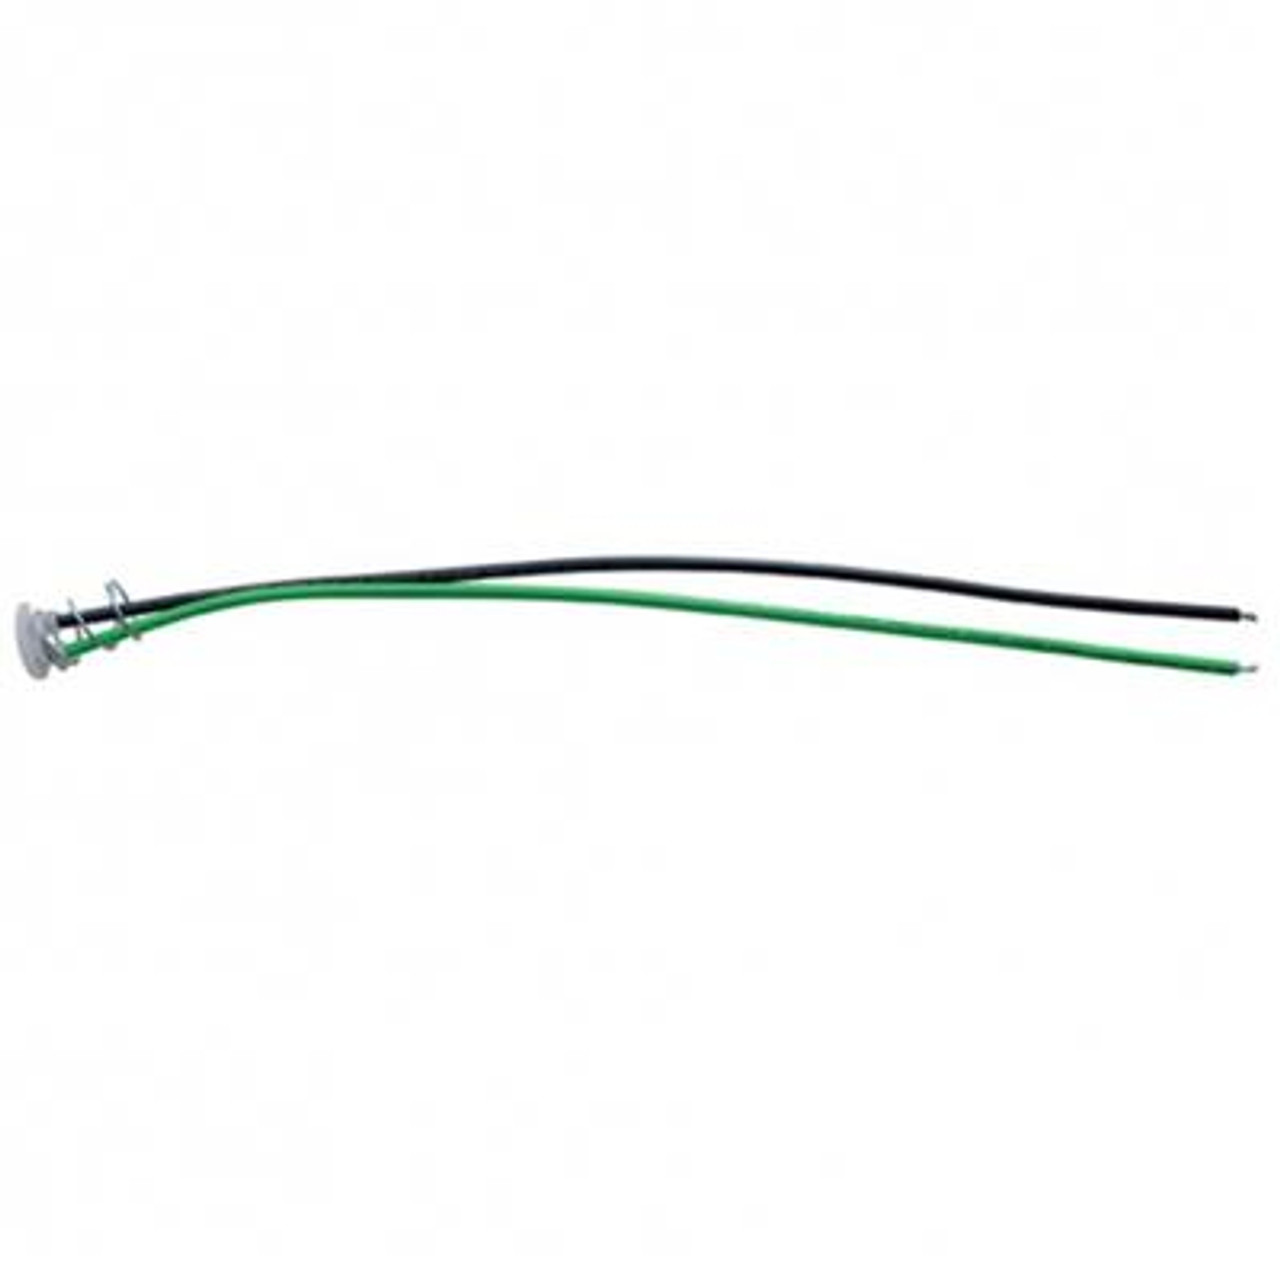 We stock with all kinds of cable ties, connectors, switches, trailer light converters, wire harnesses, and many more! If you’re looking for electrical lighting components for your rig, there’s a good chance that we have it in stock.